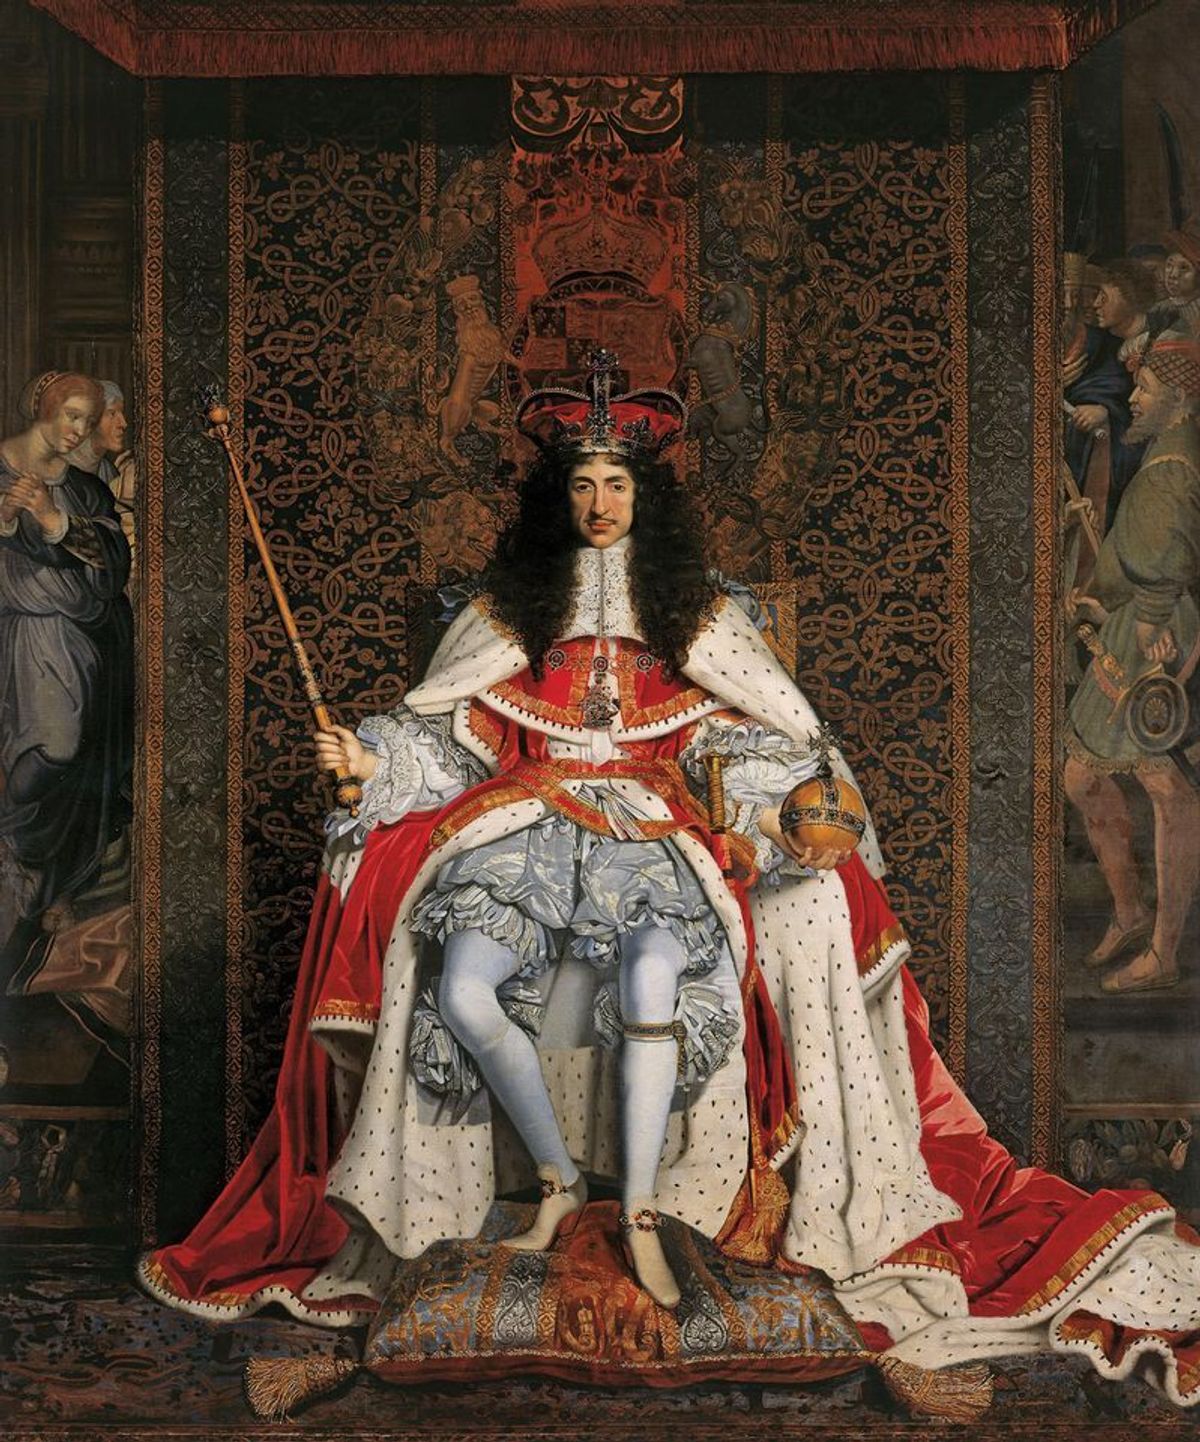 Charles II, in a portrait (around 1671-76) by John Michael Wright © Royal Collection Trust; Her Majesty Queen Elizabeth II, 2017